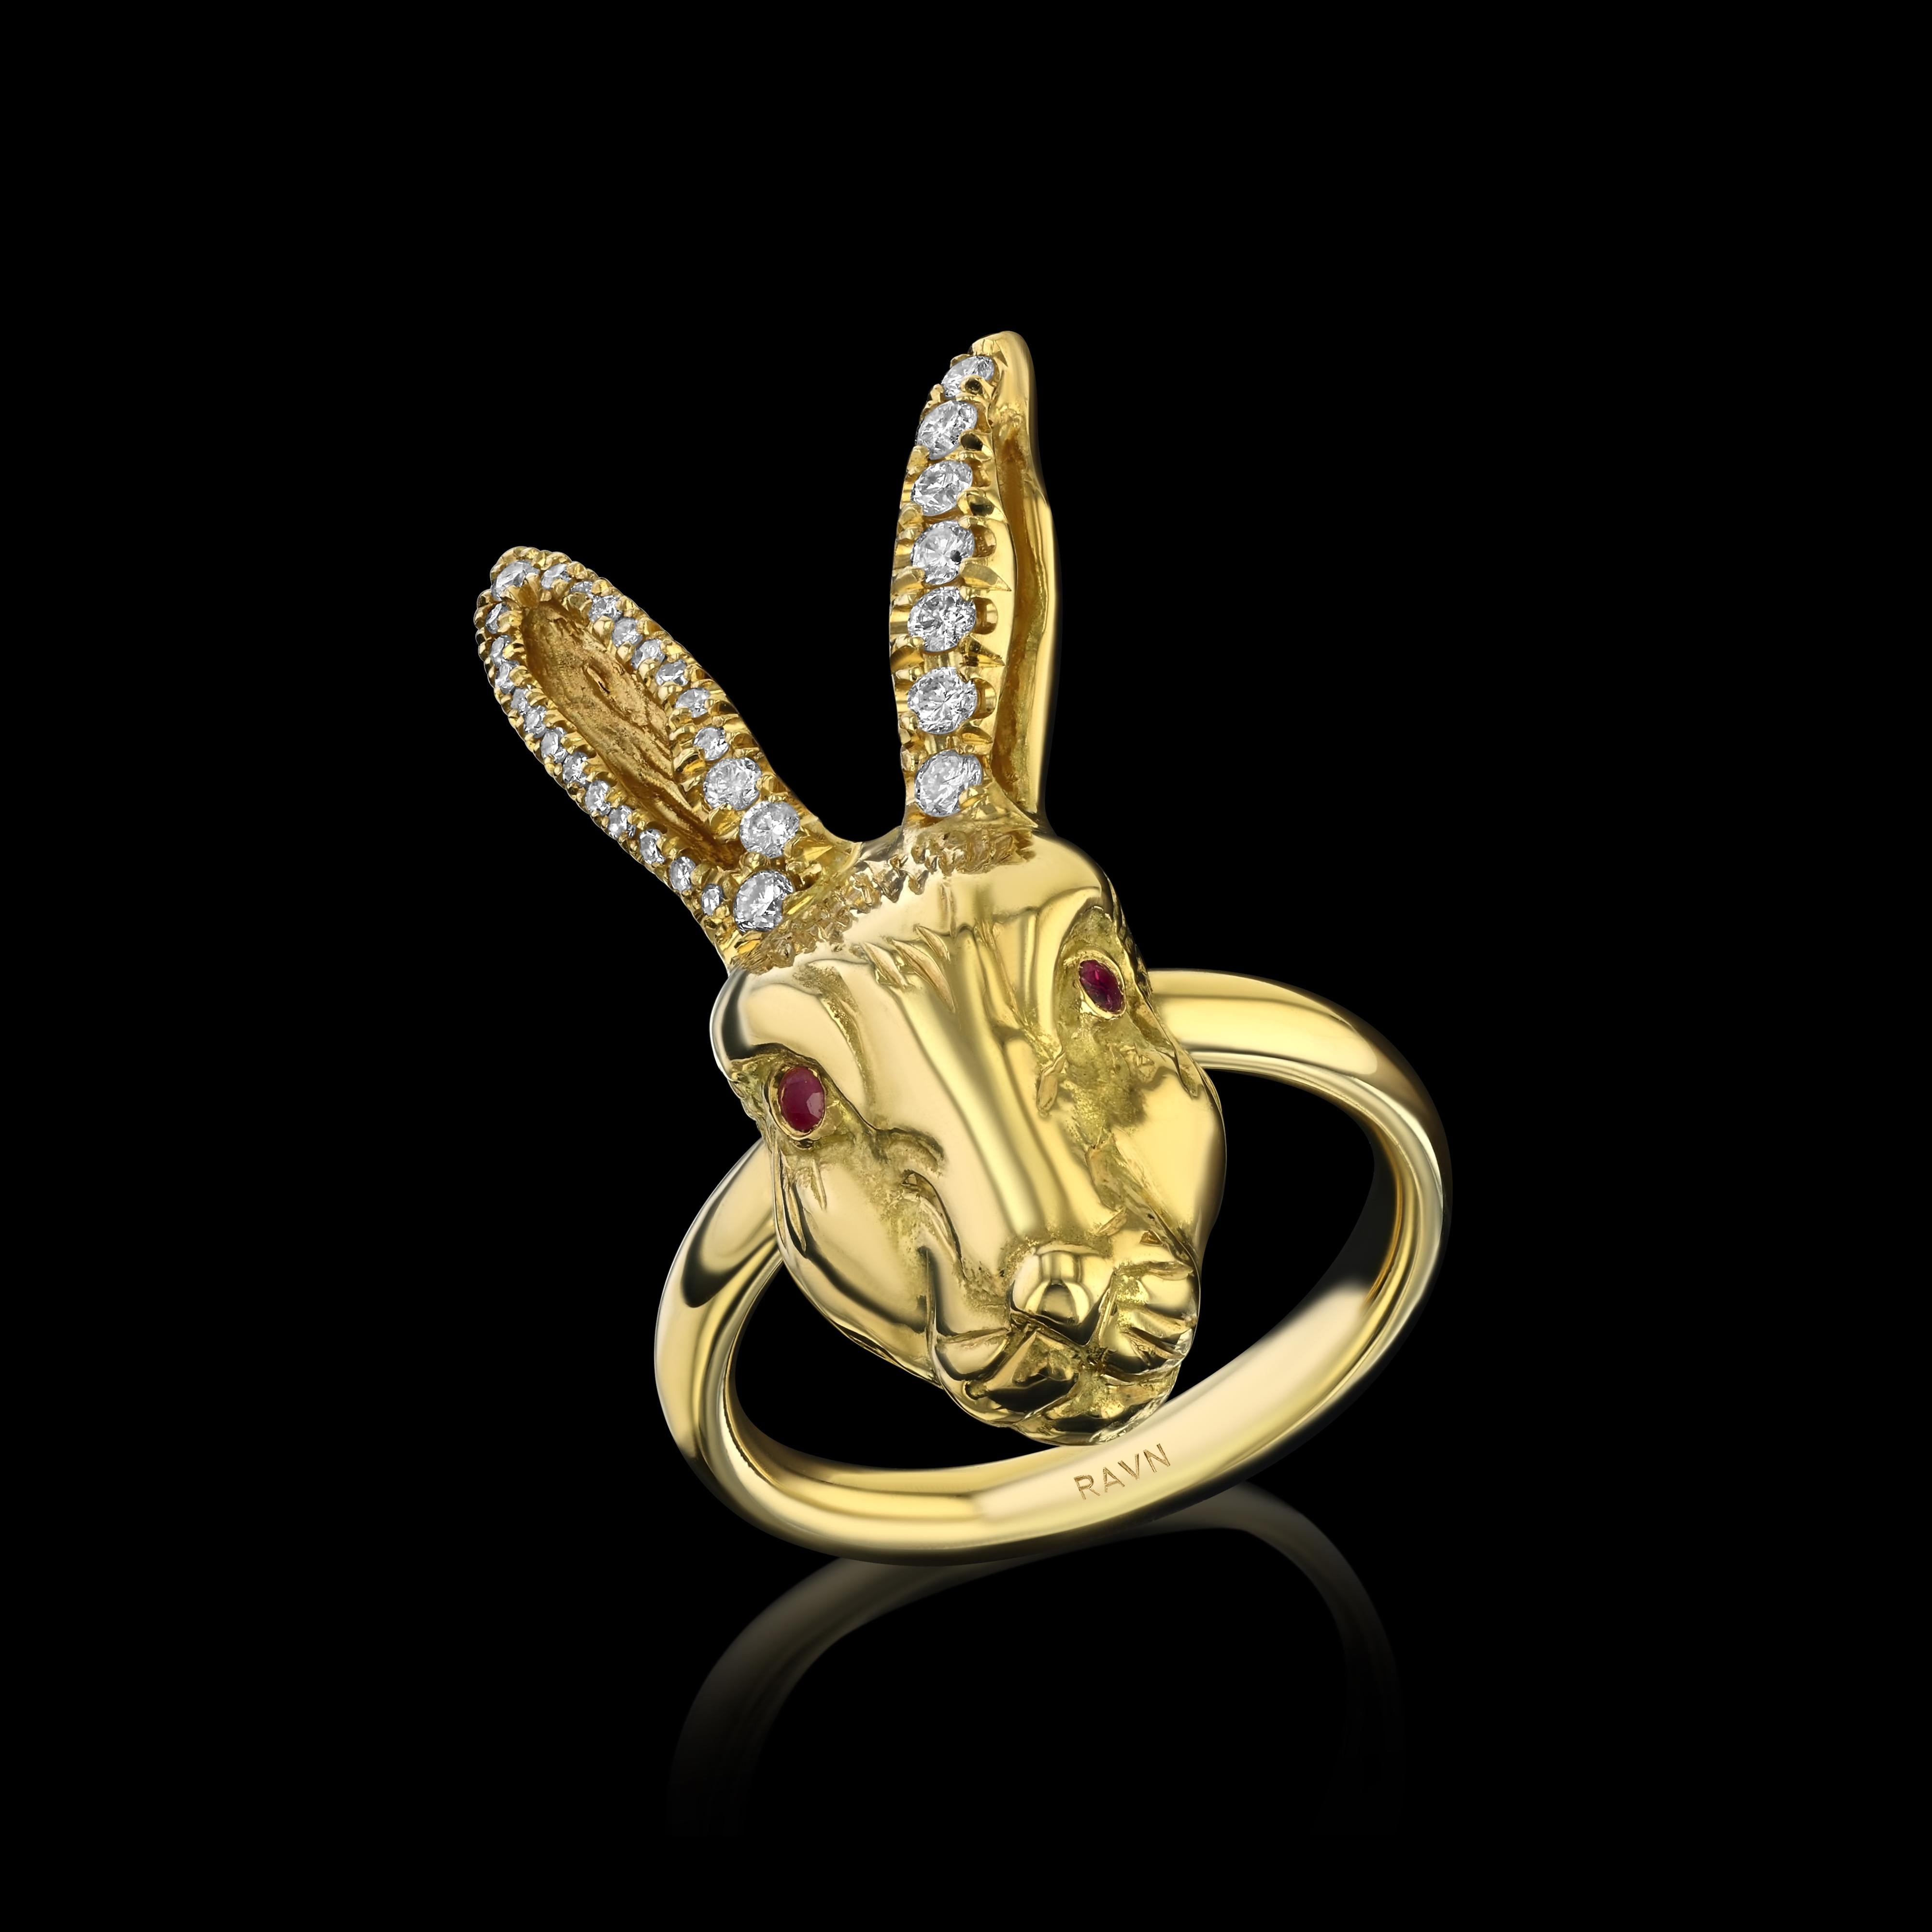 18k yellow gold, hand carved, Wonderland Rabbit Ring with Ruby eyes and 31 diamonds encrusted ears (0.26ct), from the House of RAVN Wild Heart Collection.